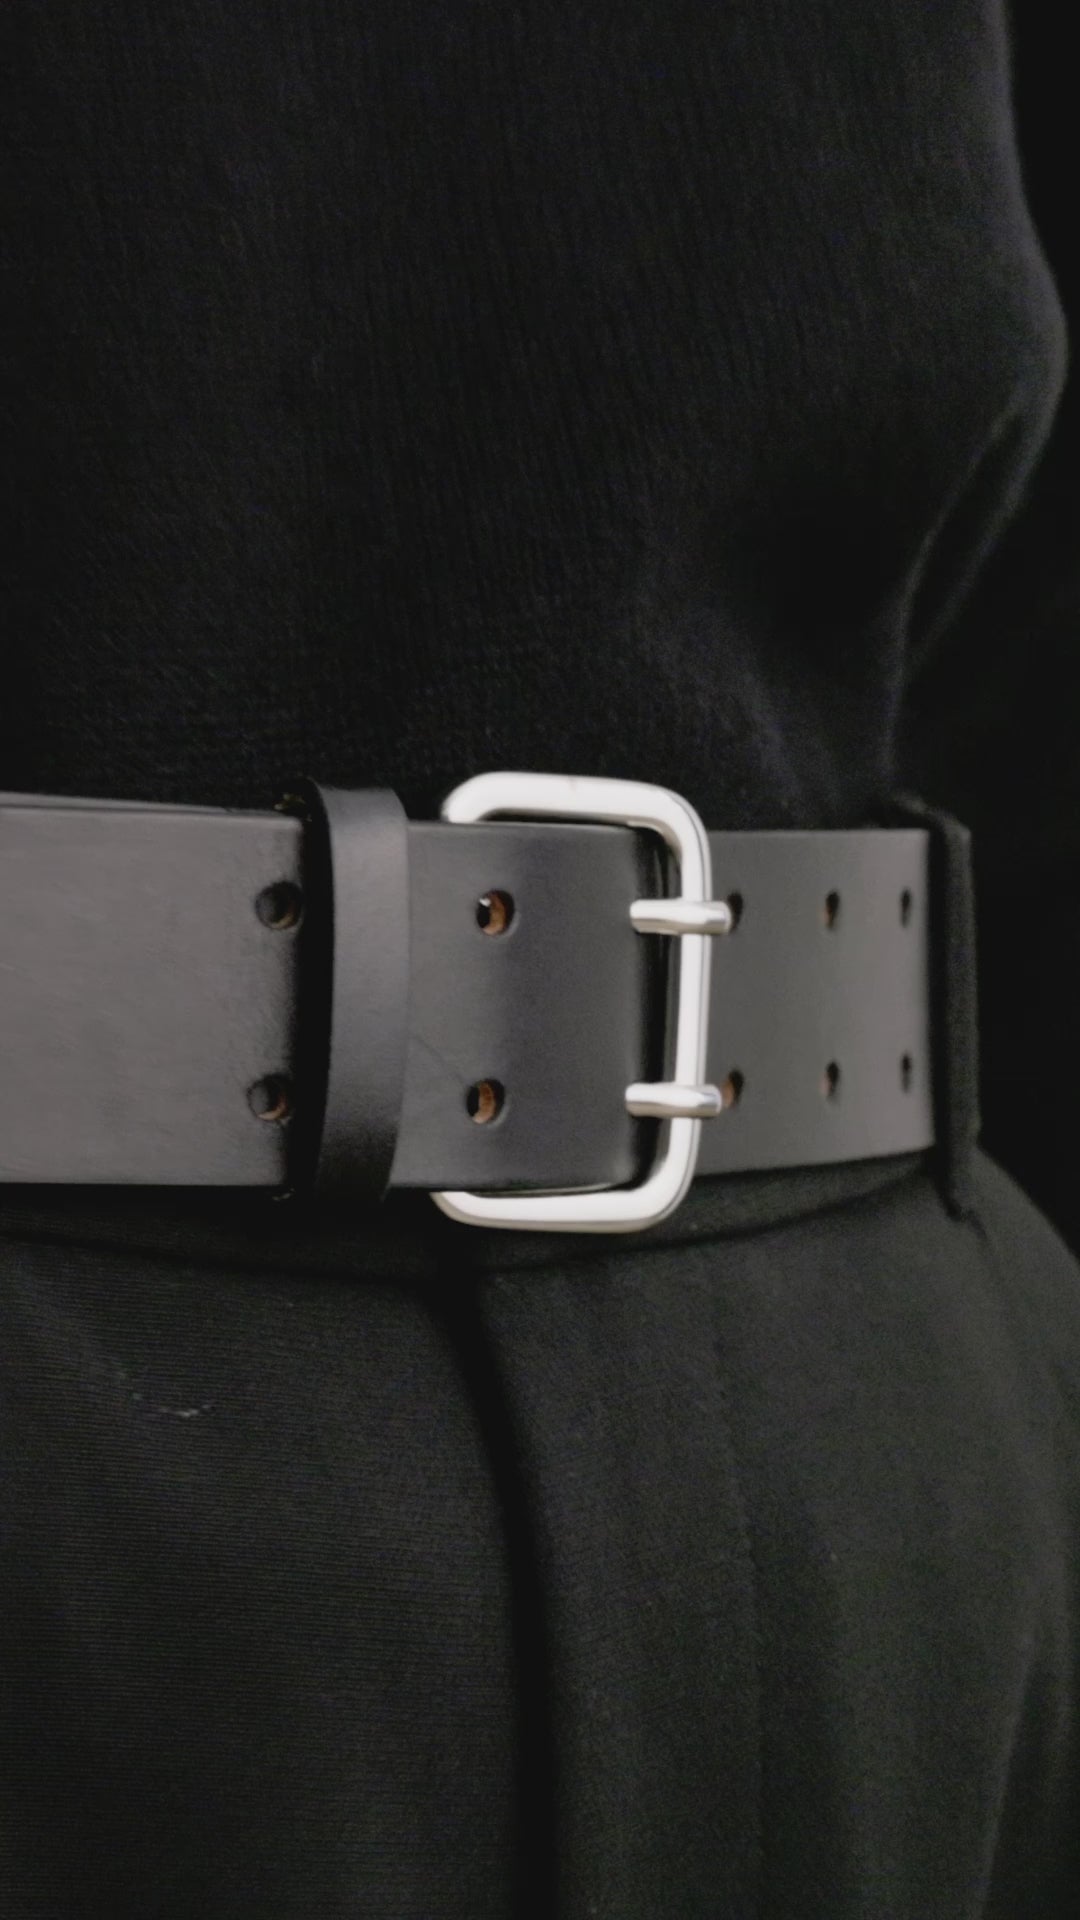 Déhanche Hutch Leather Belt - Classic black leather belt with silver buckle, paired with black trousers and a black sweater. Ideal for a sophisticated, monochromatic look.